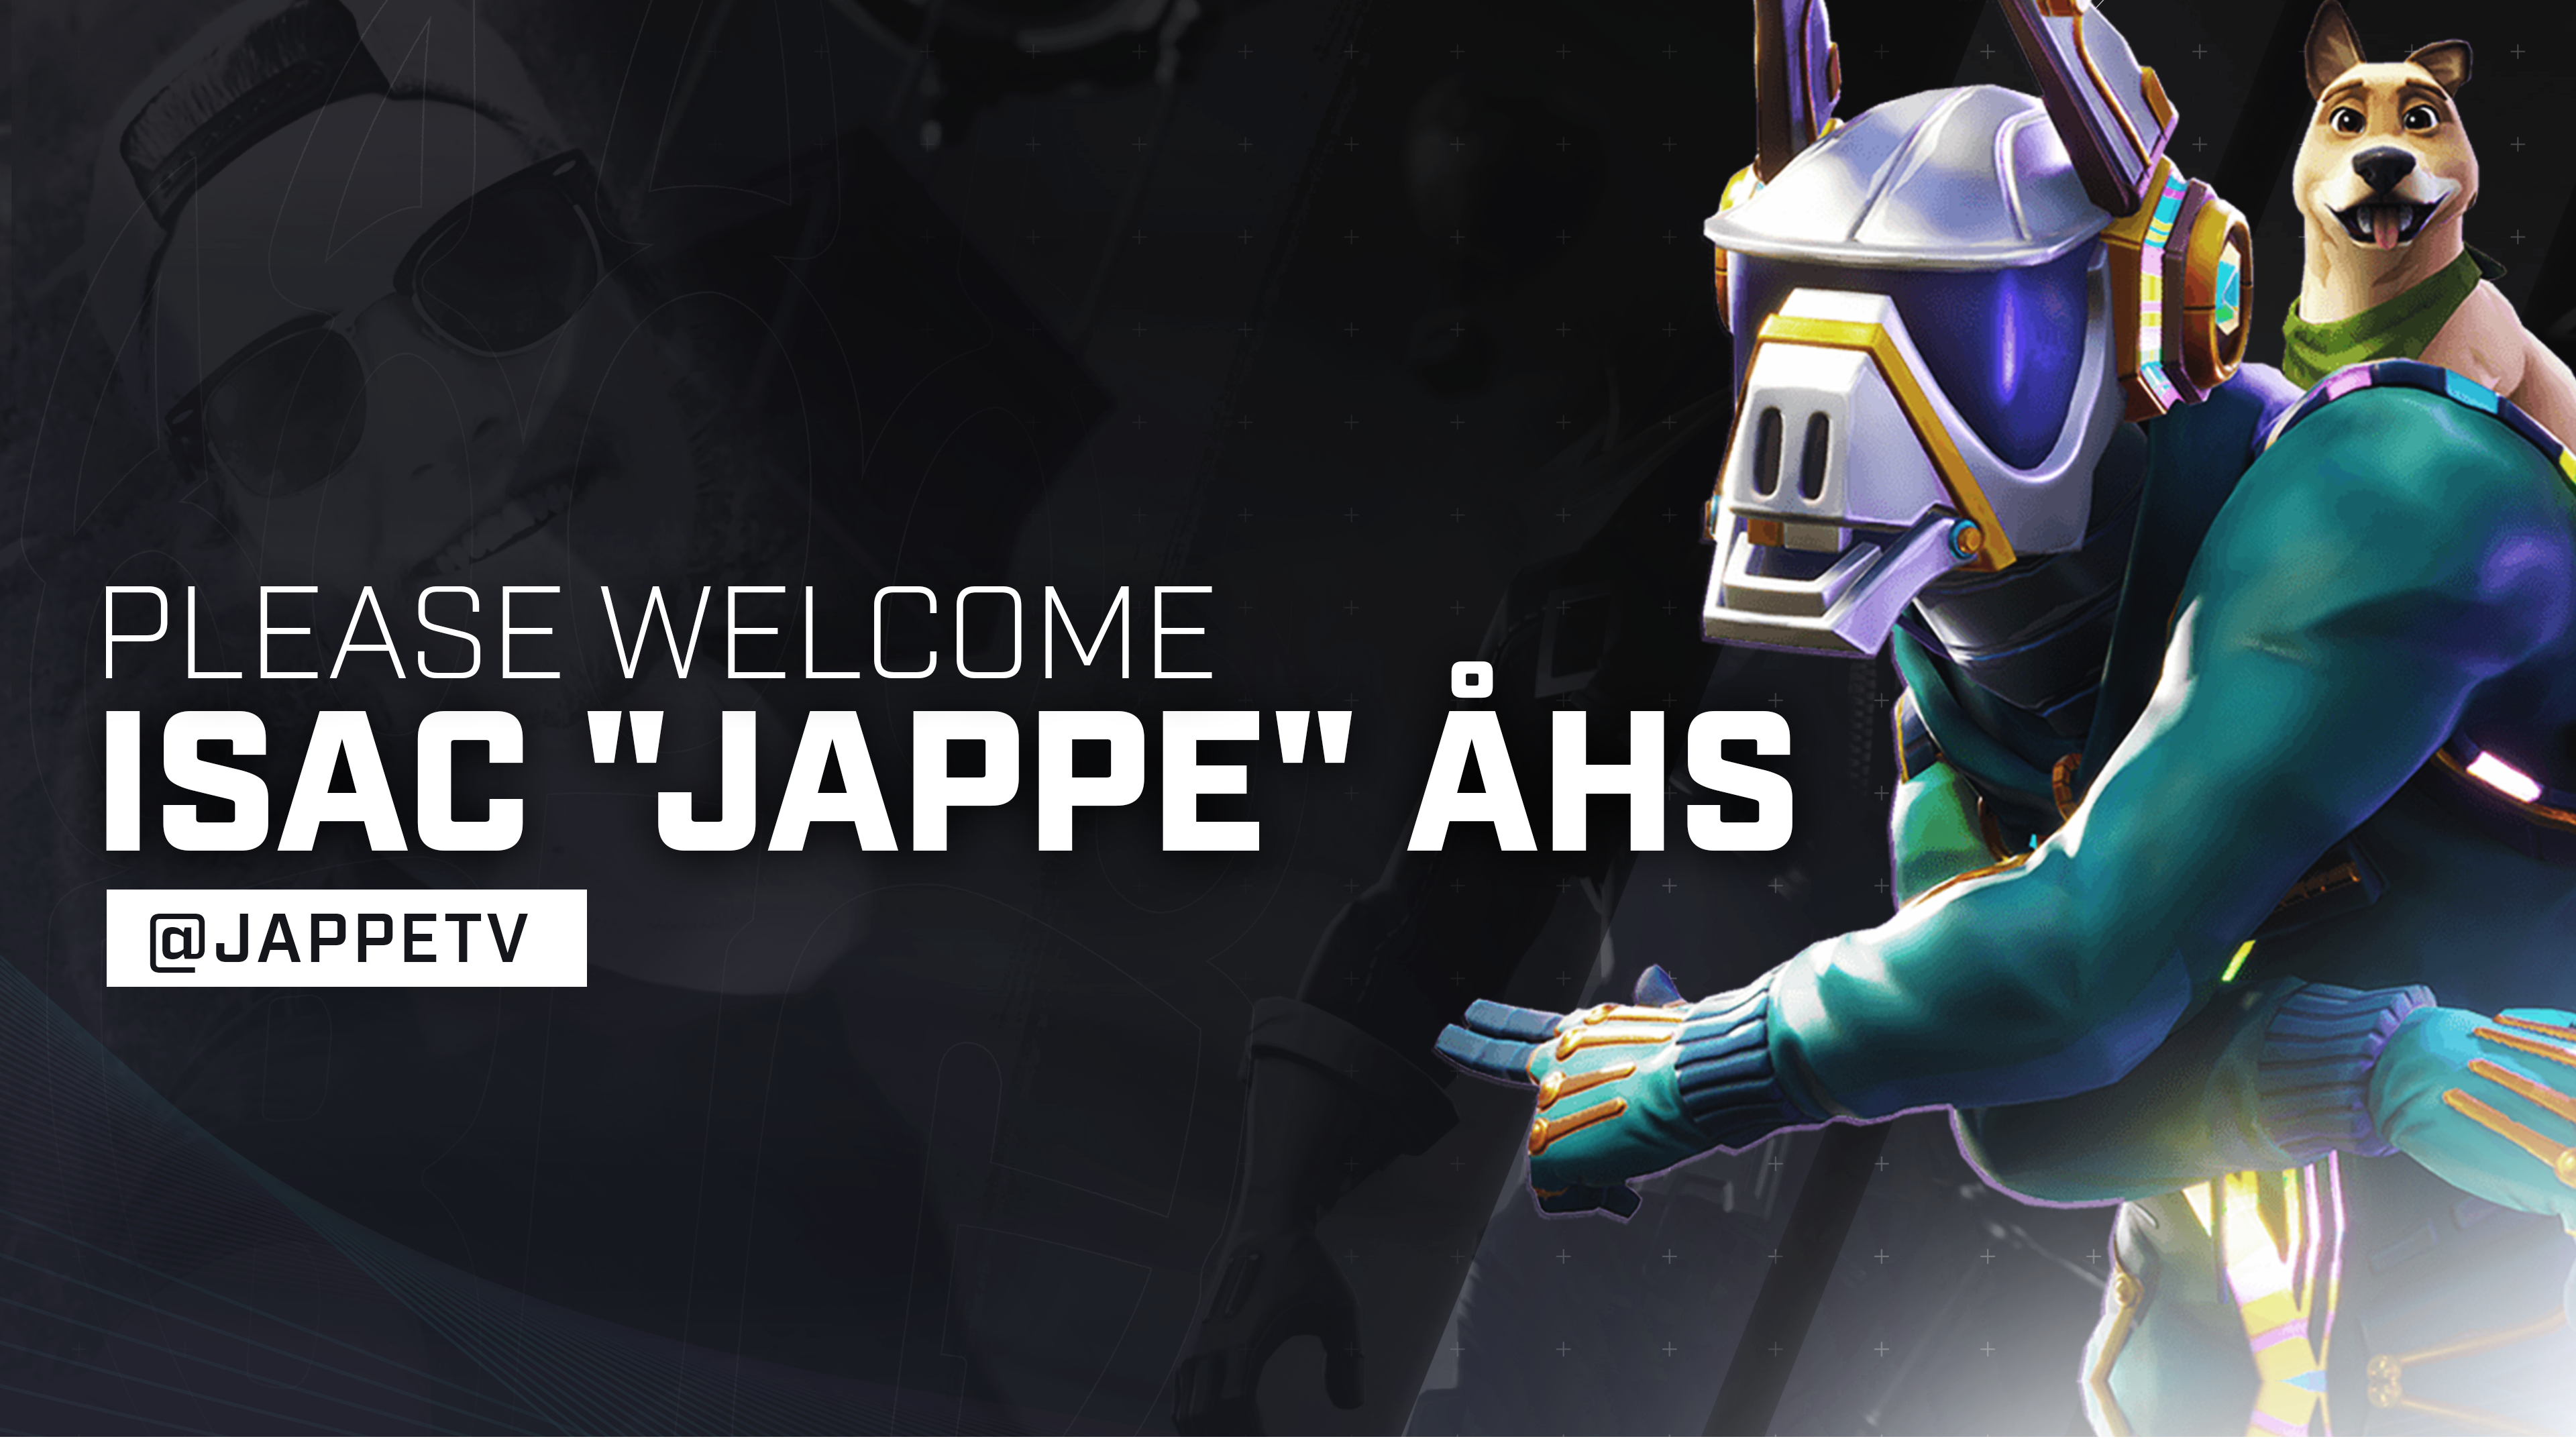 BIG expands in Fortnite with Isac Jappe Åhs 